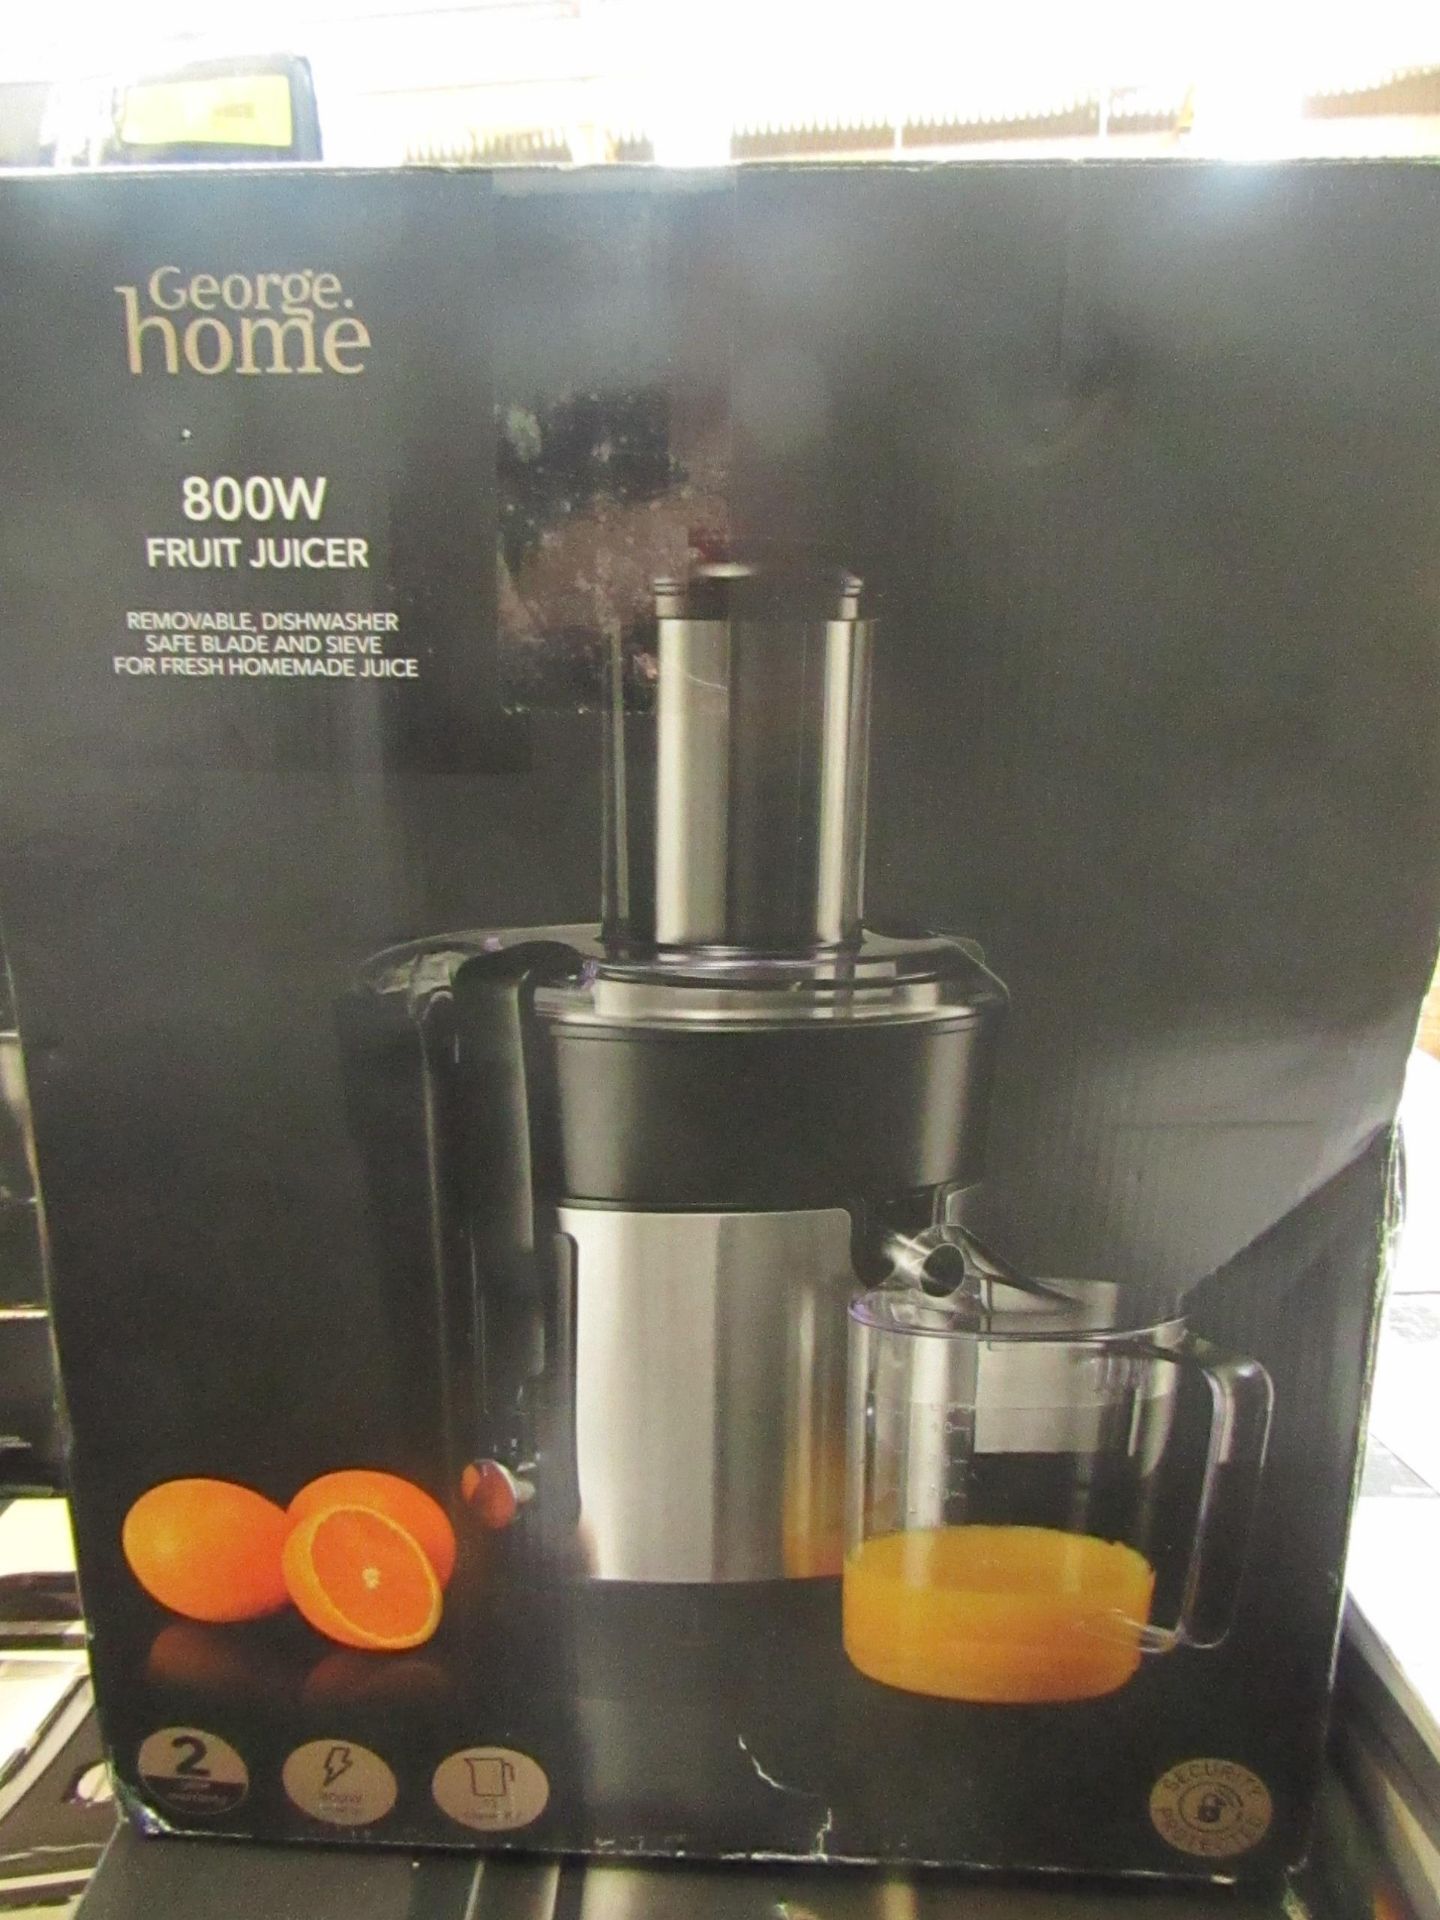 | 2X | 800W 1L STAINLESS STEEL FRUIT JUICER | UNCHECKED & BOXED | NO ONLINE RESALE | RRP £30 | TOTAL